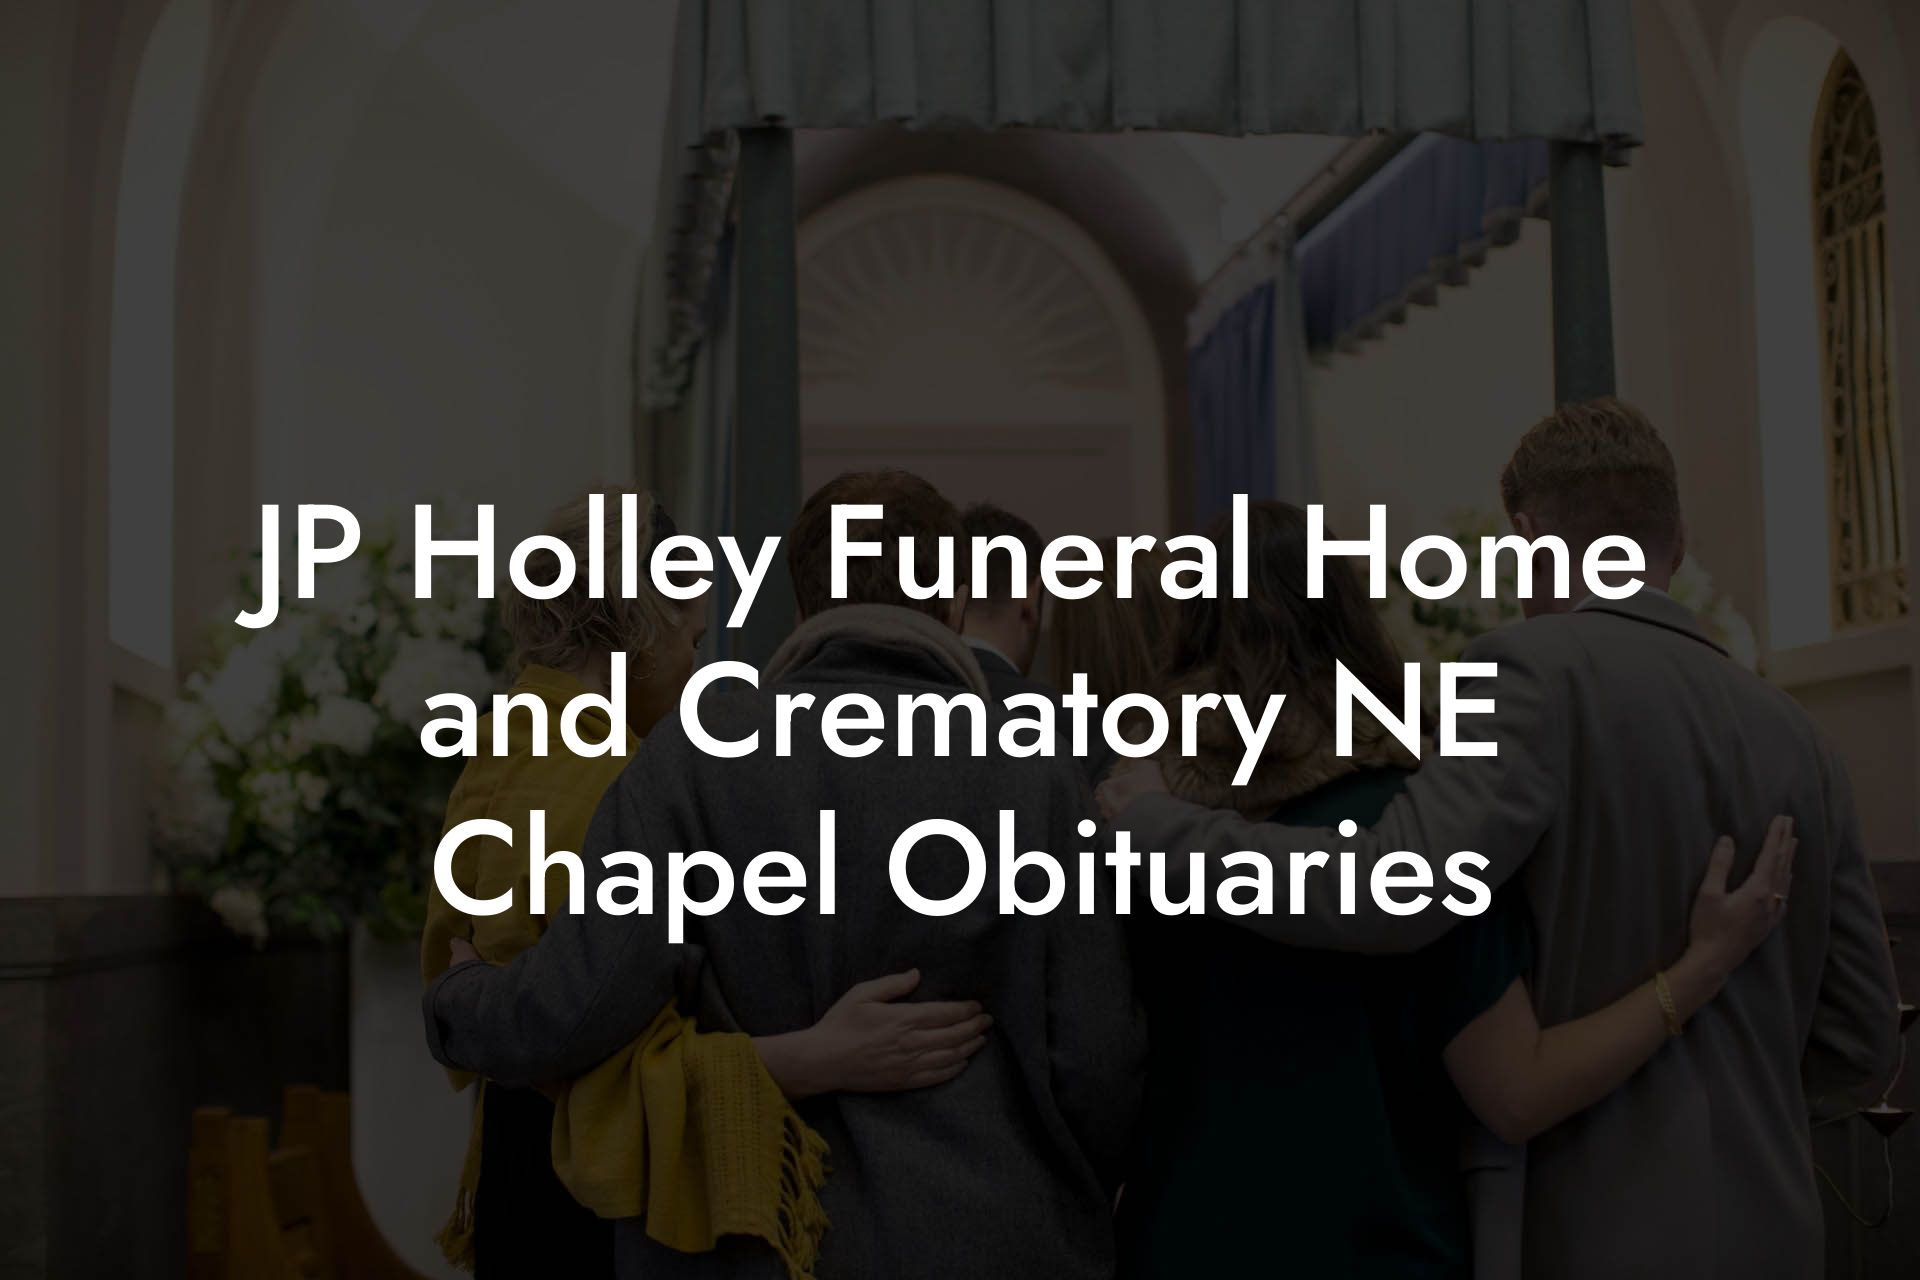 JP Holley Funeral Home and Crematory NE Chapel Obituaries